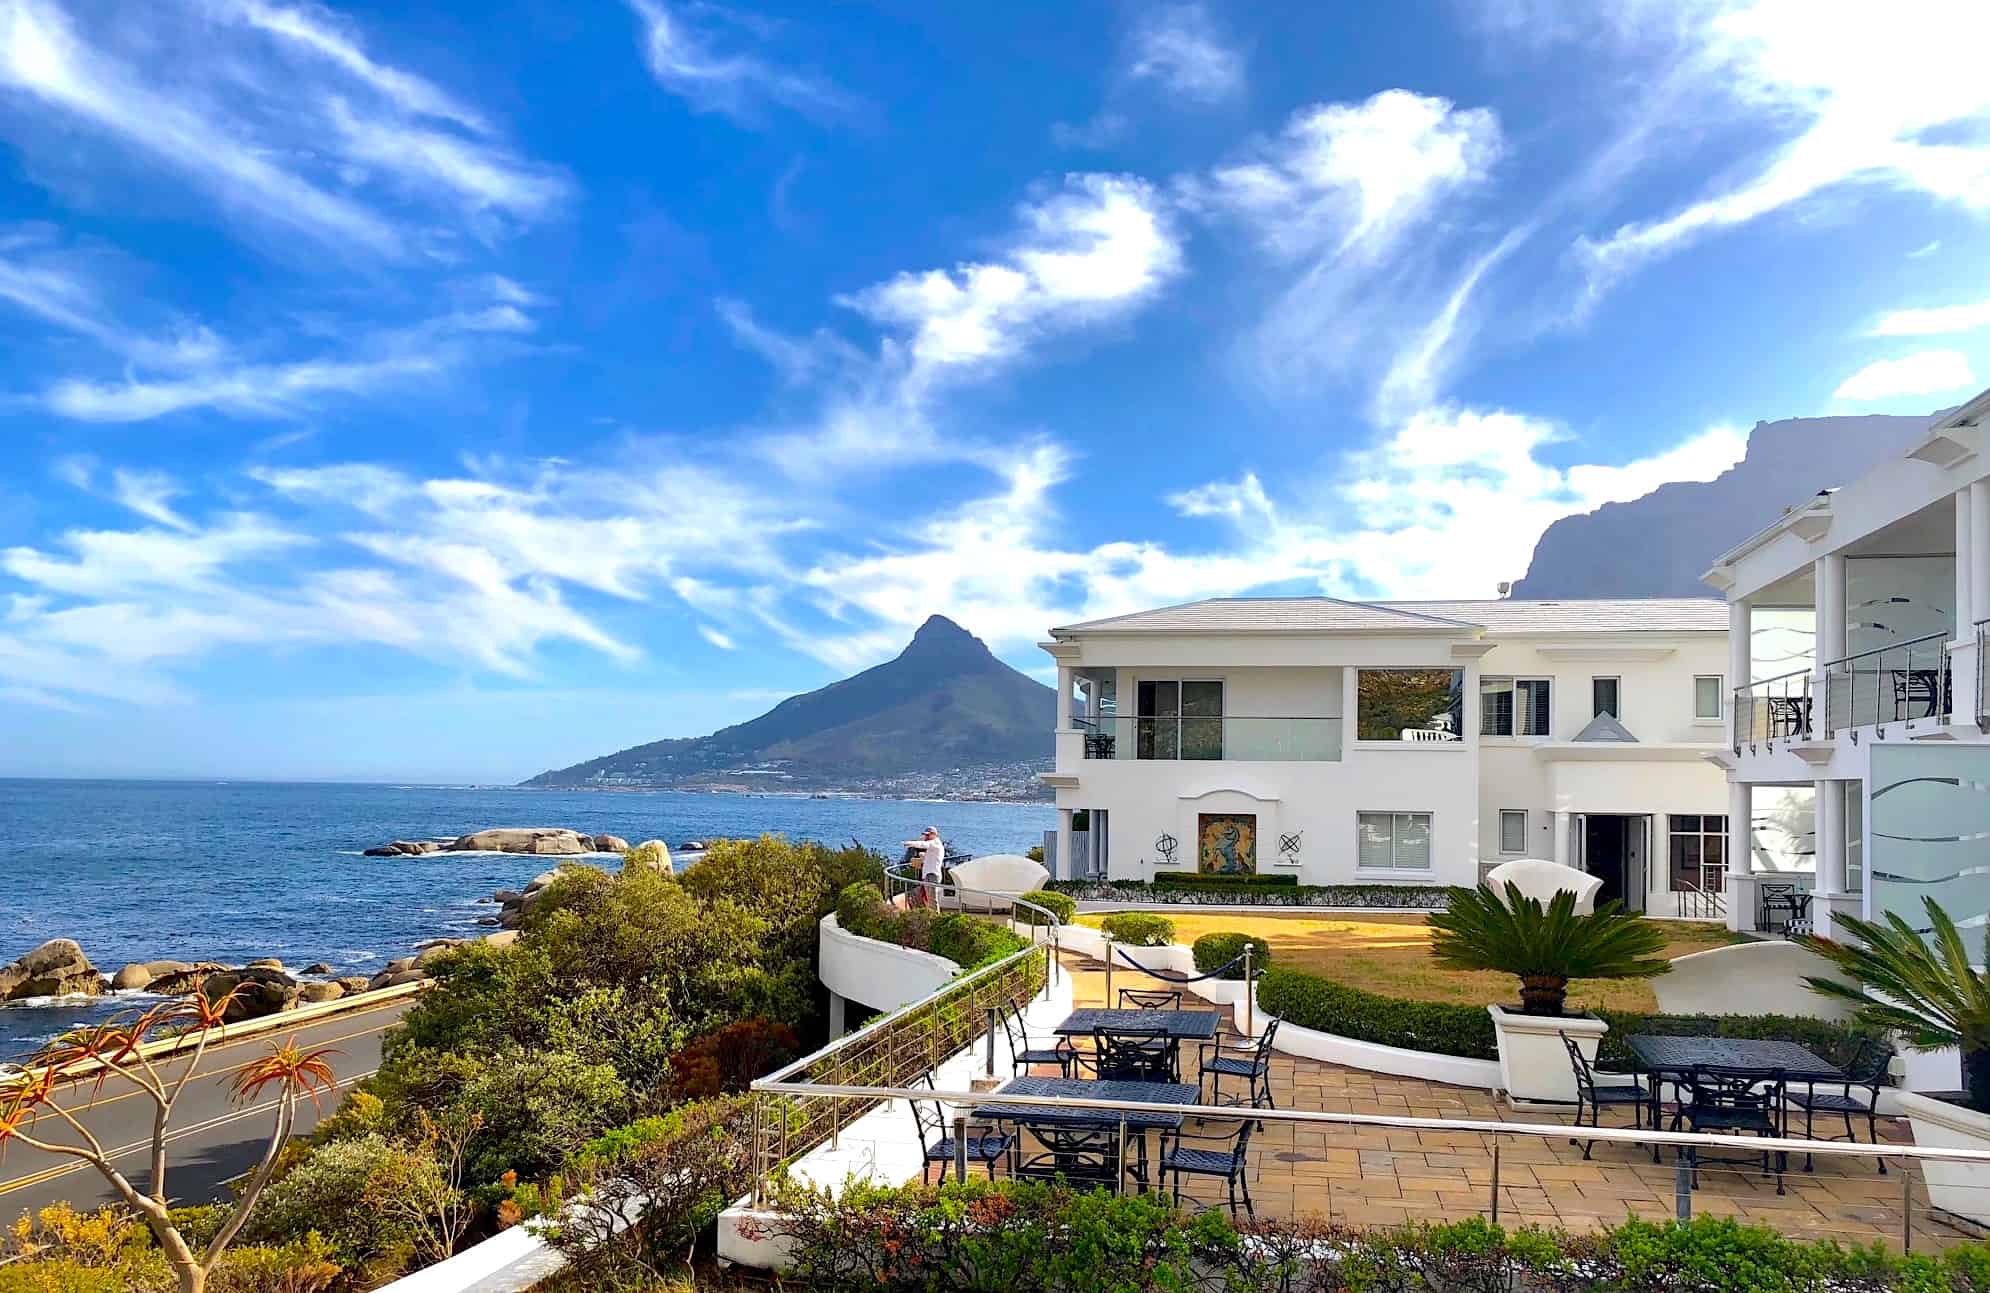 Top 5 Rated Best Value Family Friendly Hotels in Cape Town